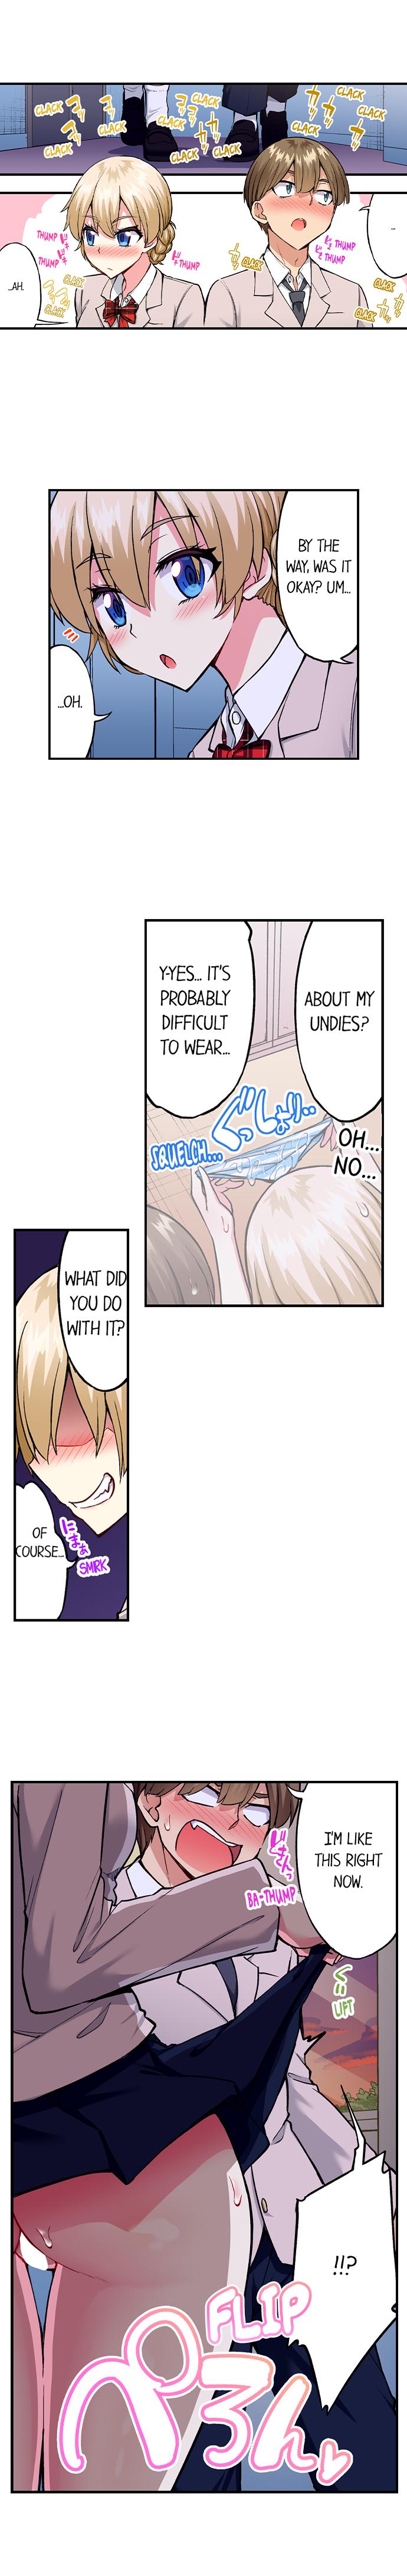 Traditional Job of Washing Girls’ Body - Chapter 183 Page 6